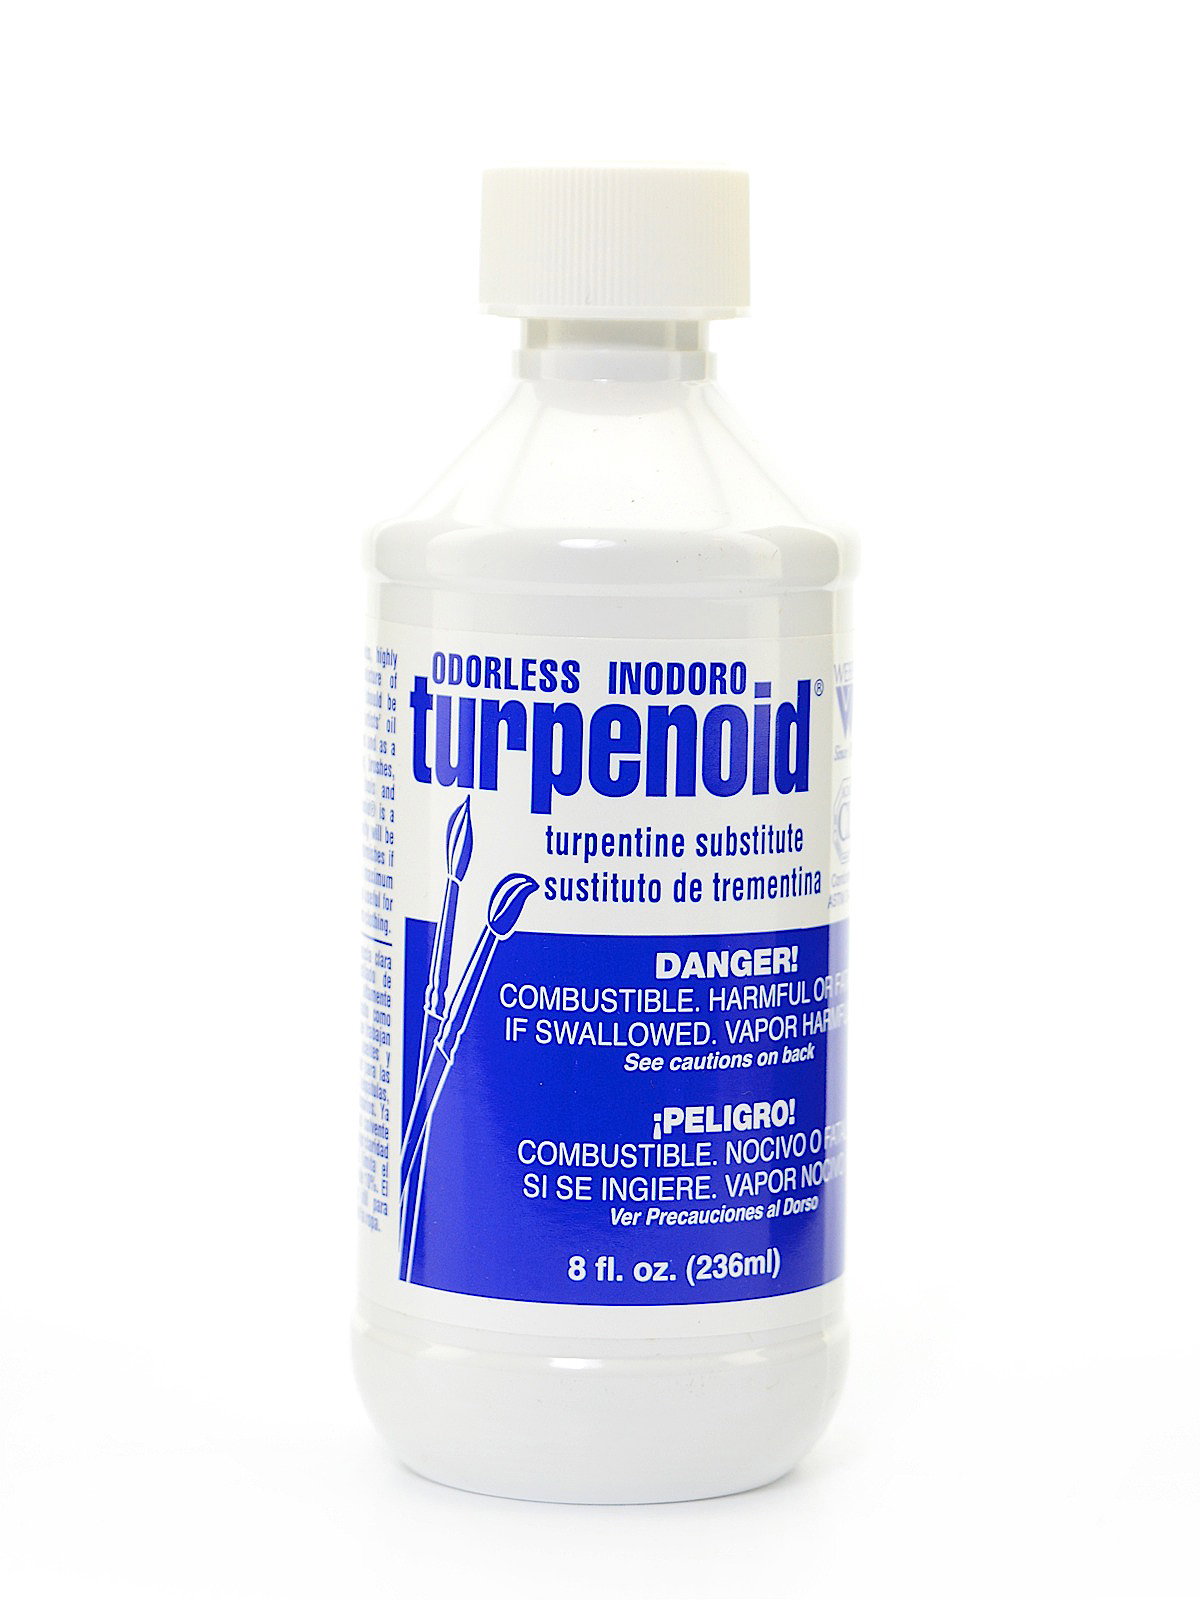 Turpentine Paint Remover & Thinner